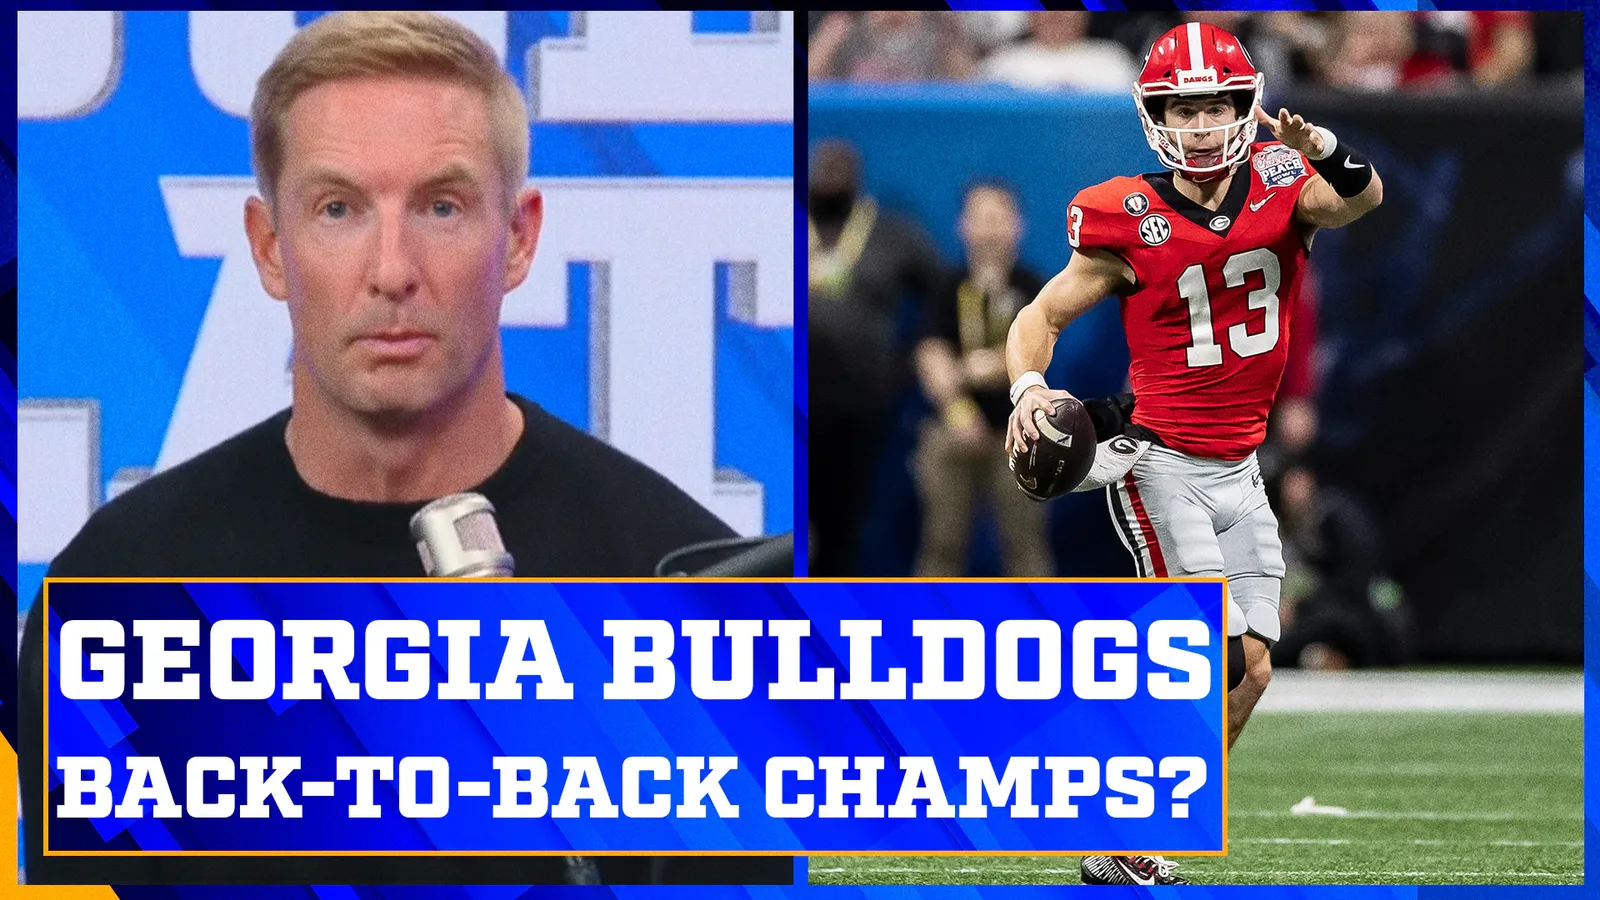 Can Georgia be back-to-back champs?